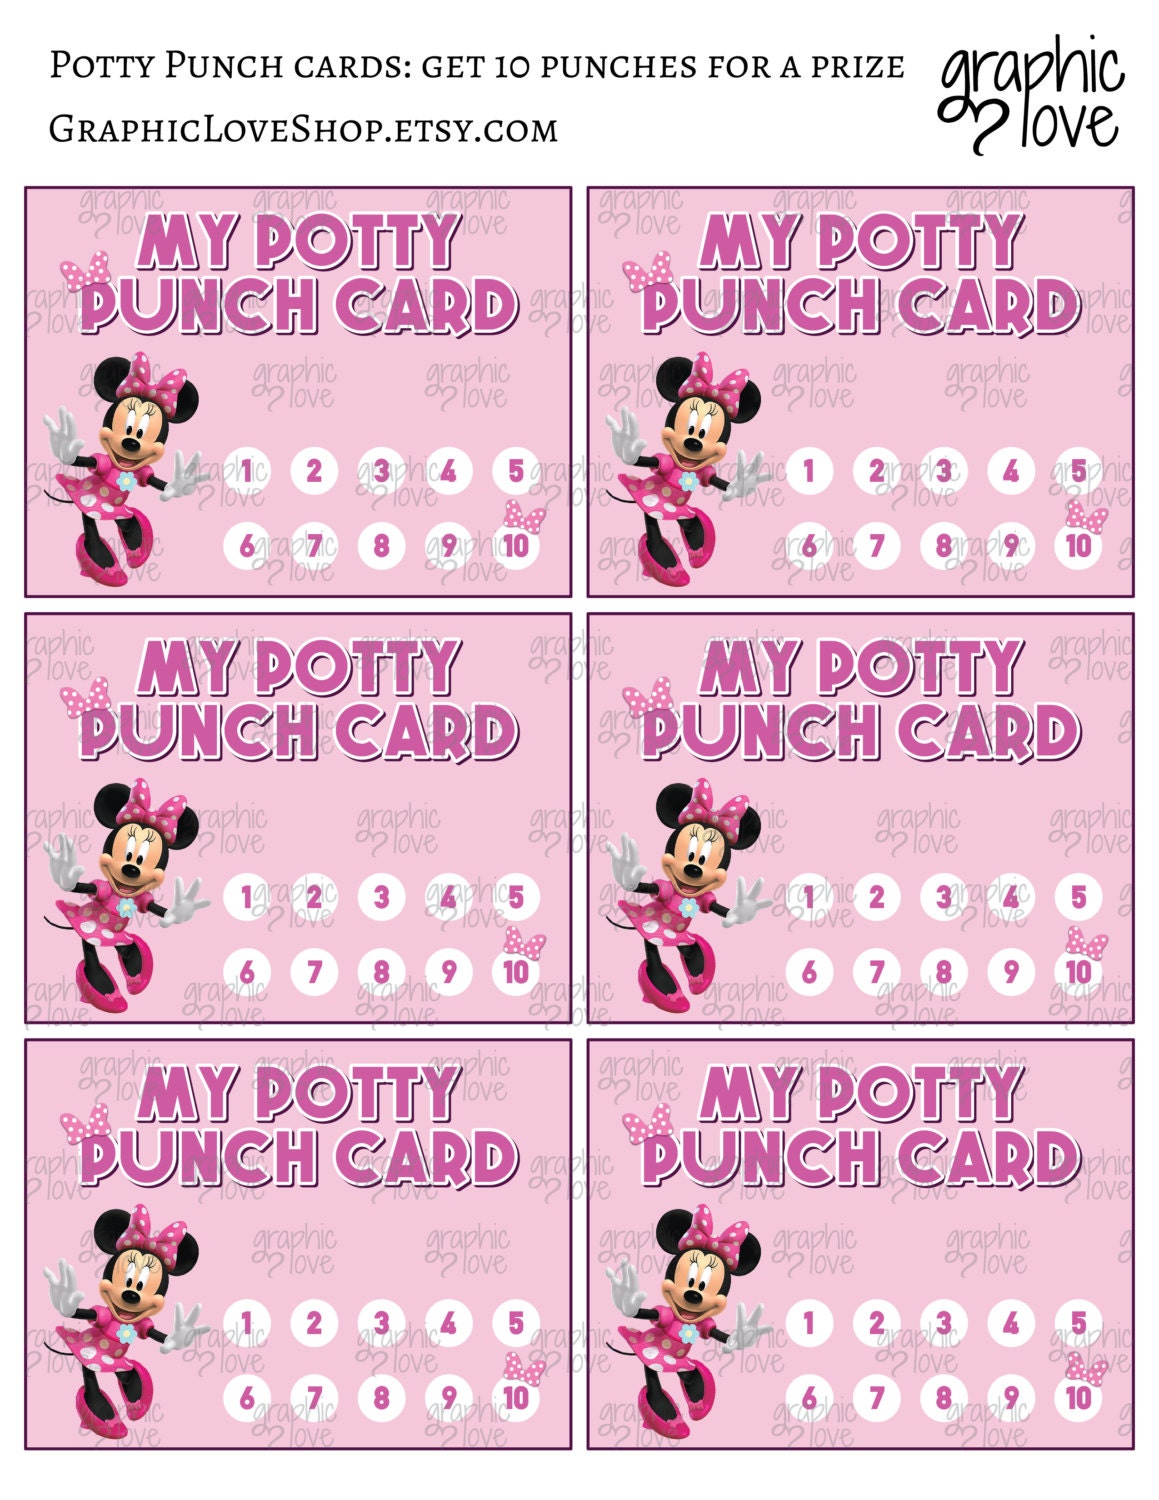 Printable Potty Training Chart Minnie Mouse